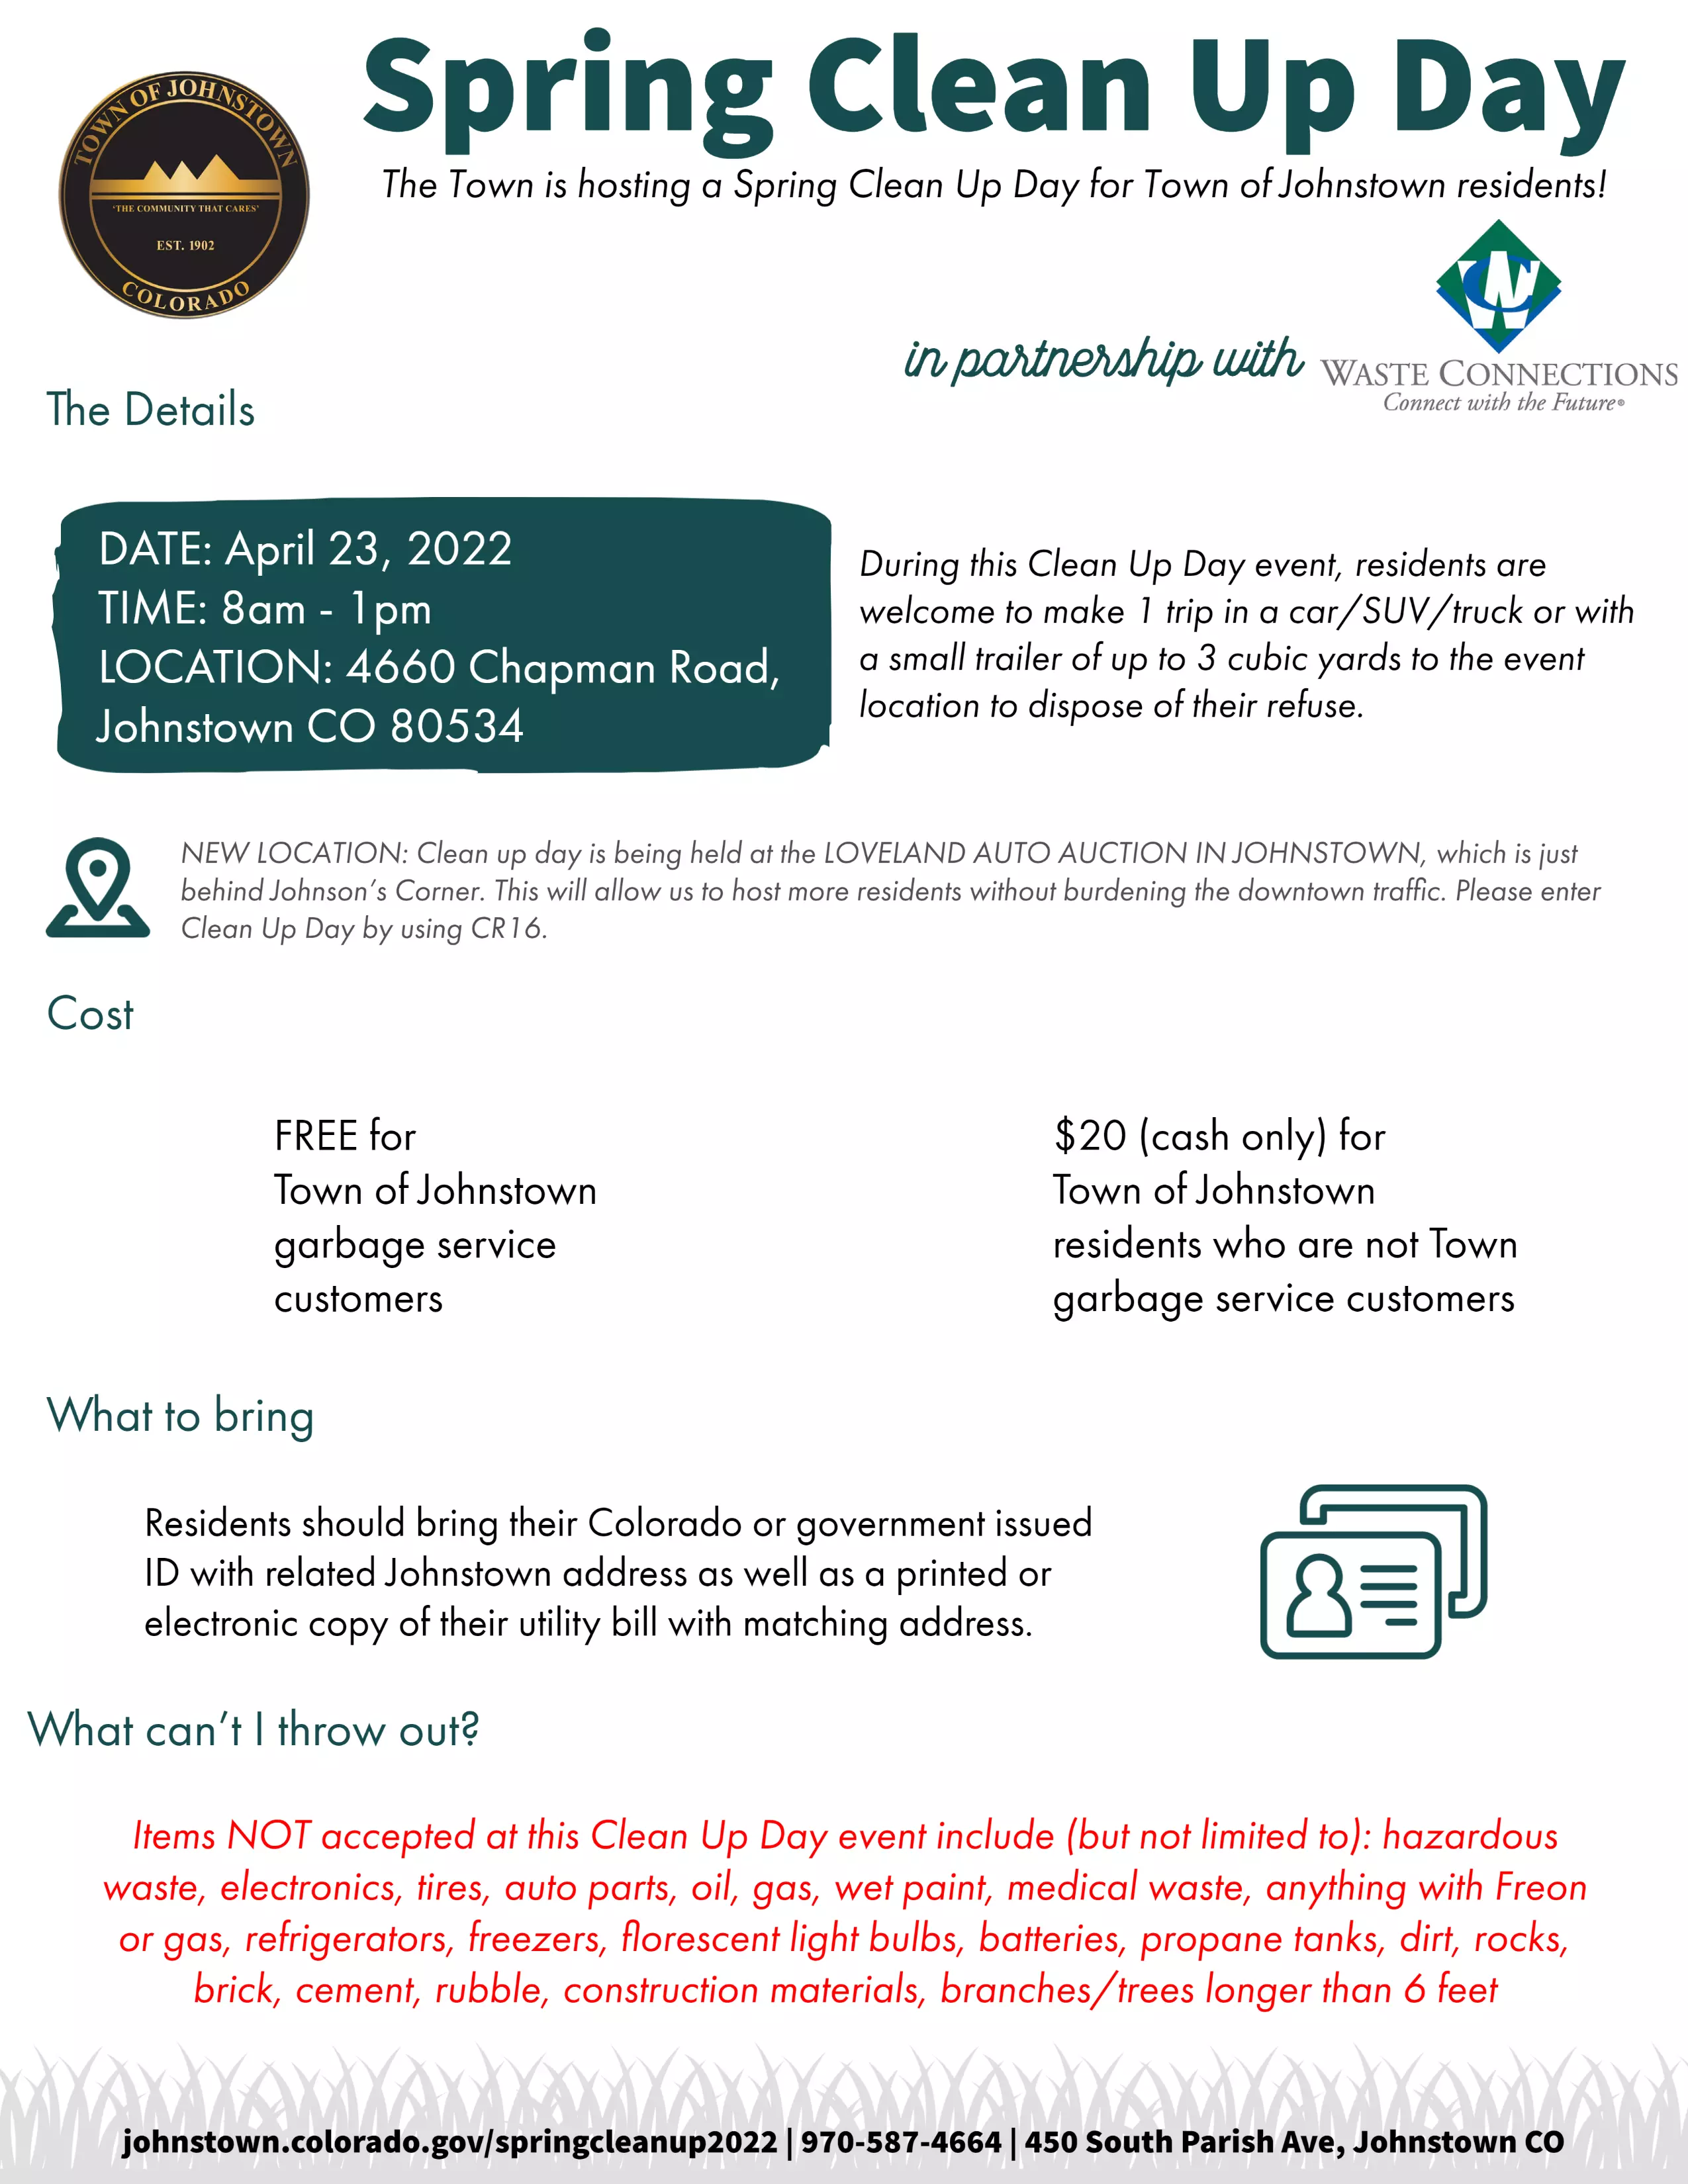 Spring Clean Up Day flyer image that includes the information typed out on this page as well as a Town of Johnstown logo and Waste Connections logo